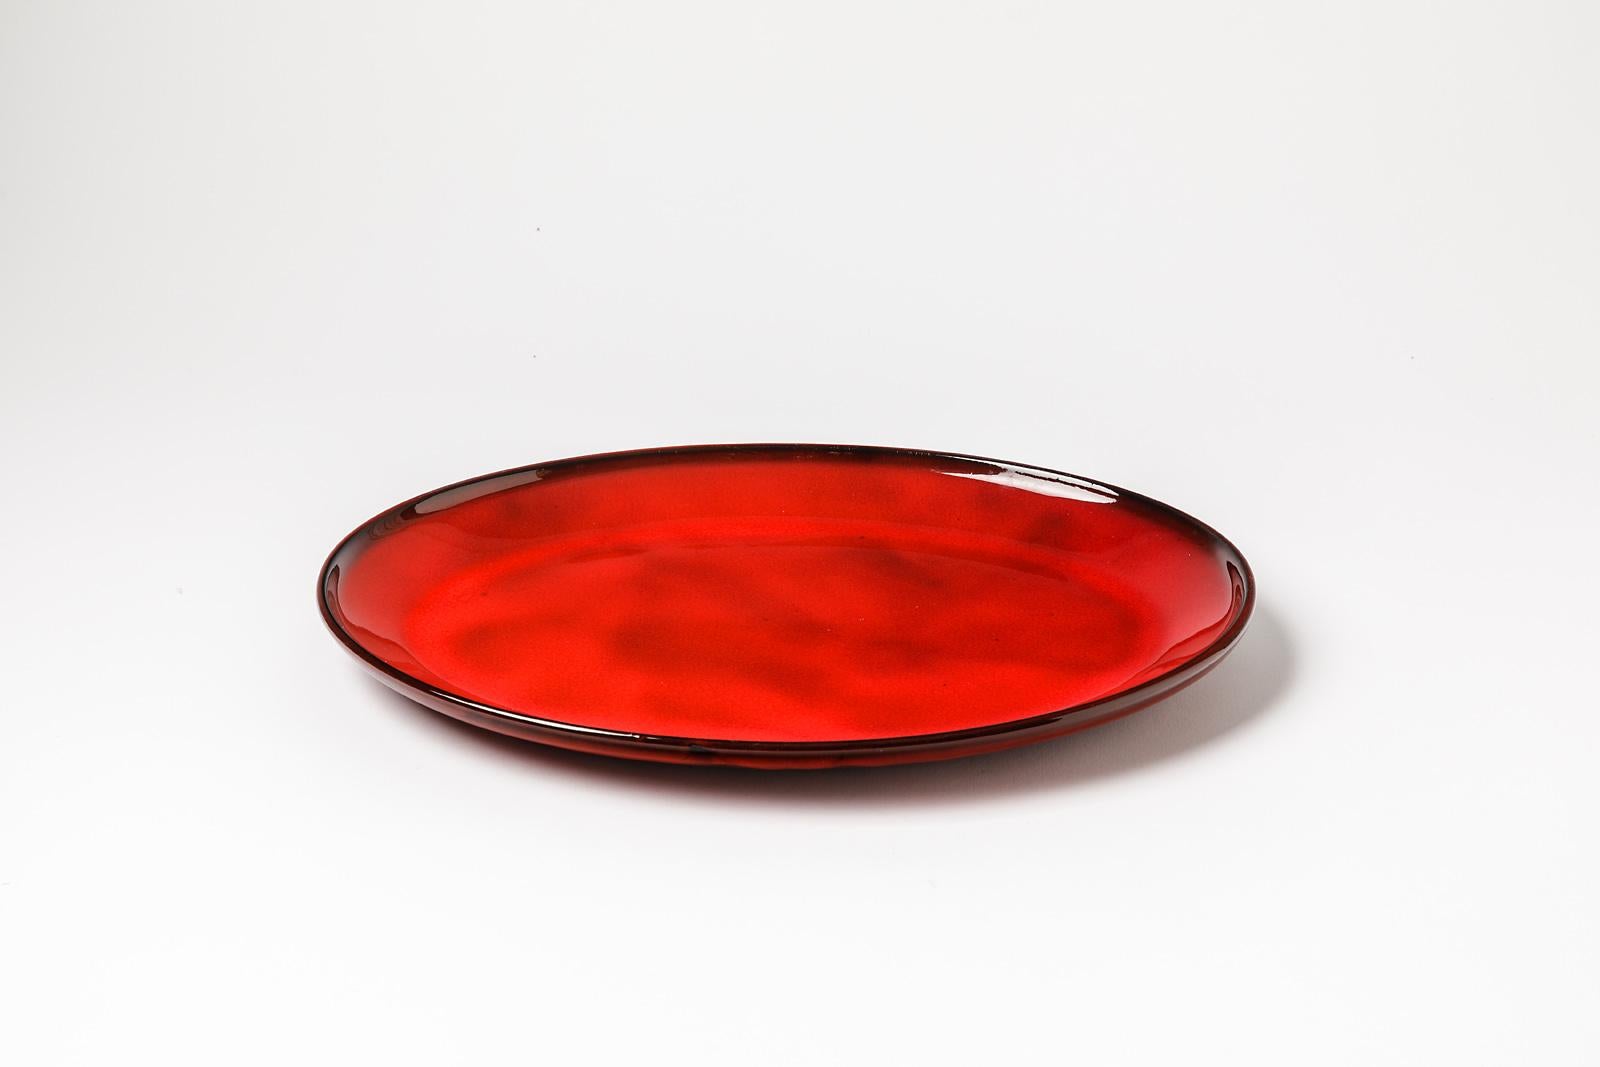 Gerard Hofmann

Realised in vallauris circa 1950

Original and large shiny red ceramic plate

Original perfect condition

Signed under the base

Measures: Height 3 cm Large 35 cm Width 25 cm.